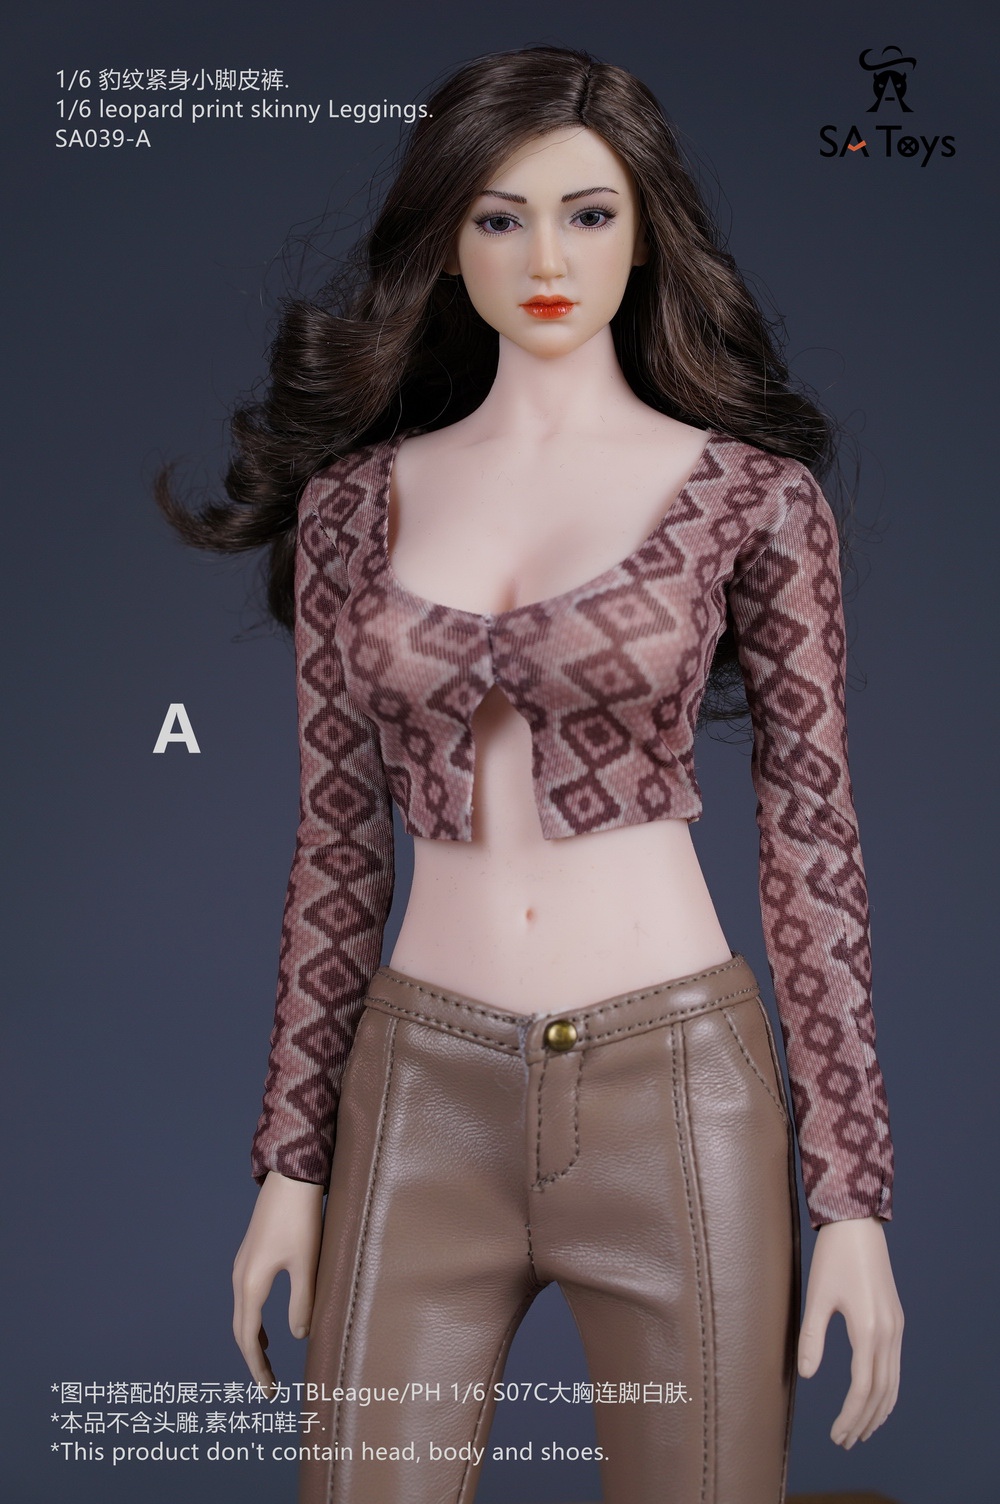 clothing - NEW PRODUCT: SA Toys: 1/6 Lantern Sleeve Leather Pants, Leopard Printed Leather Pants, Printed Backless Dresses (Multiple Options) 10584812